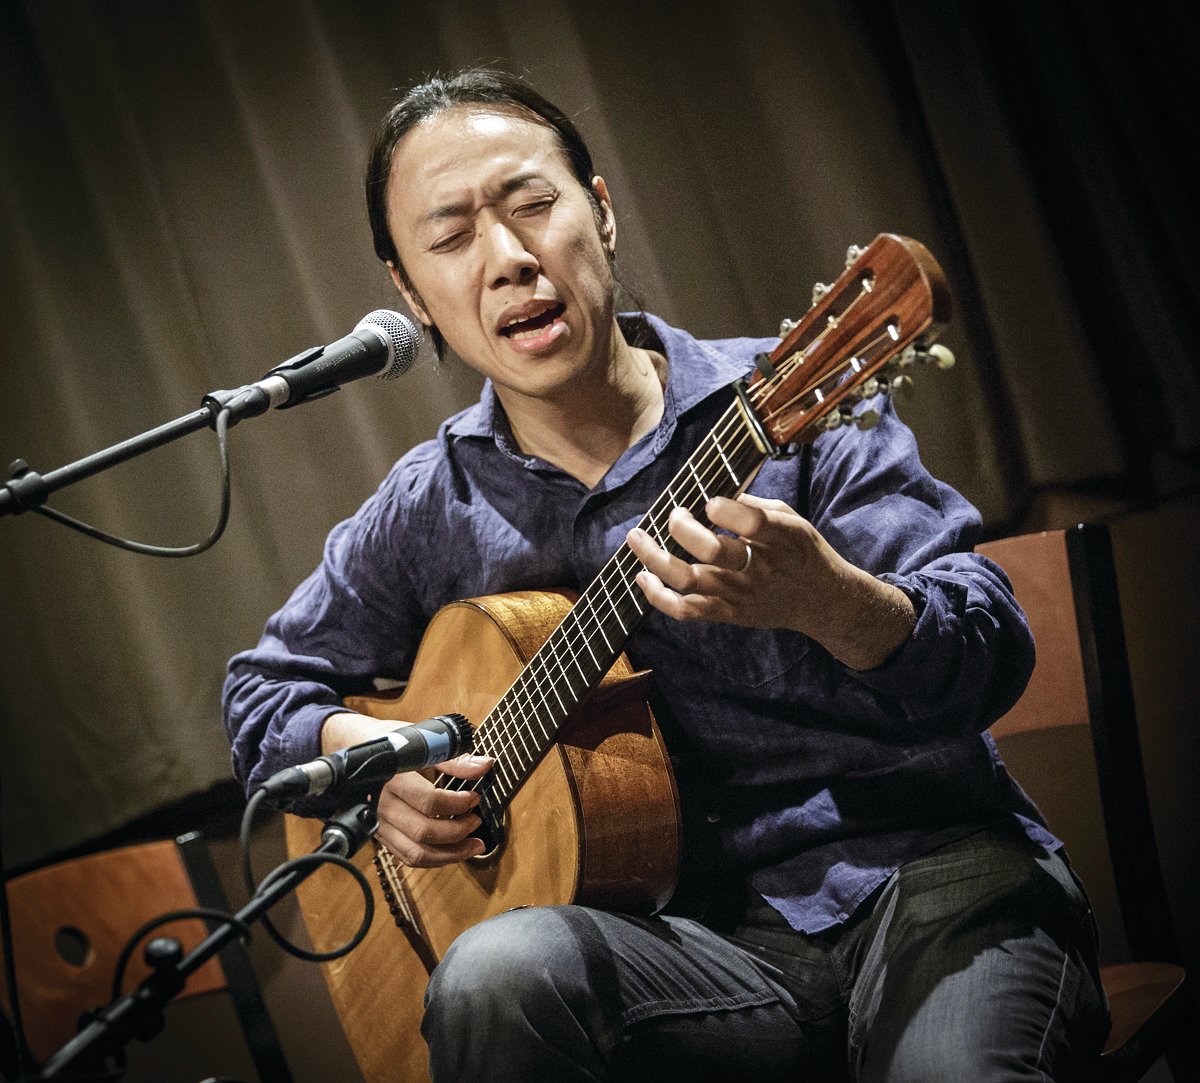 Guitarist, storyteller, and composer Hiroya Tsukamoto will bring his talents to Port Townsend with a concert at the Palindrome in late May.